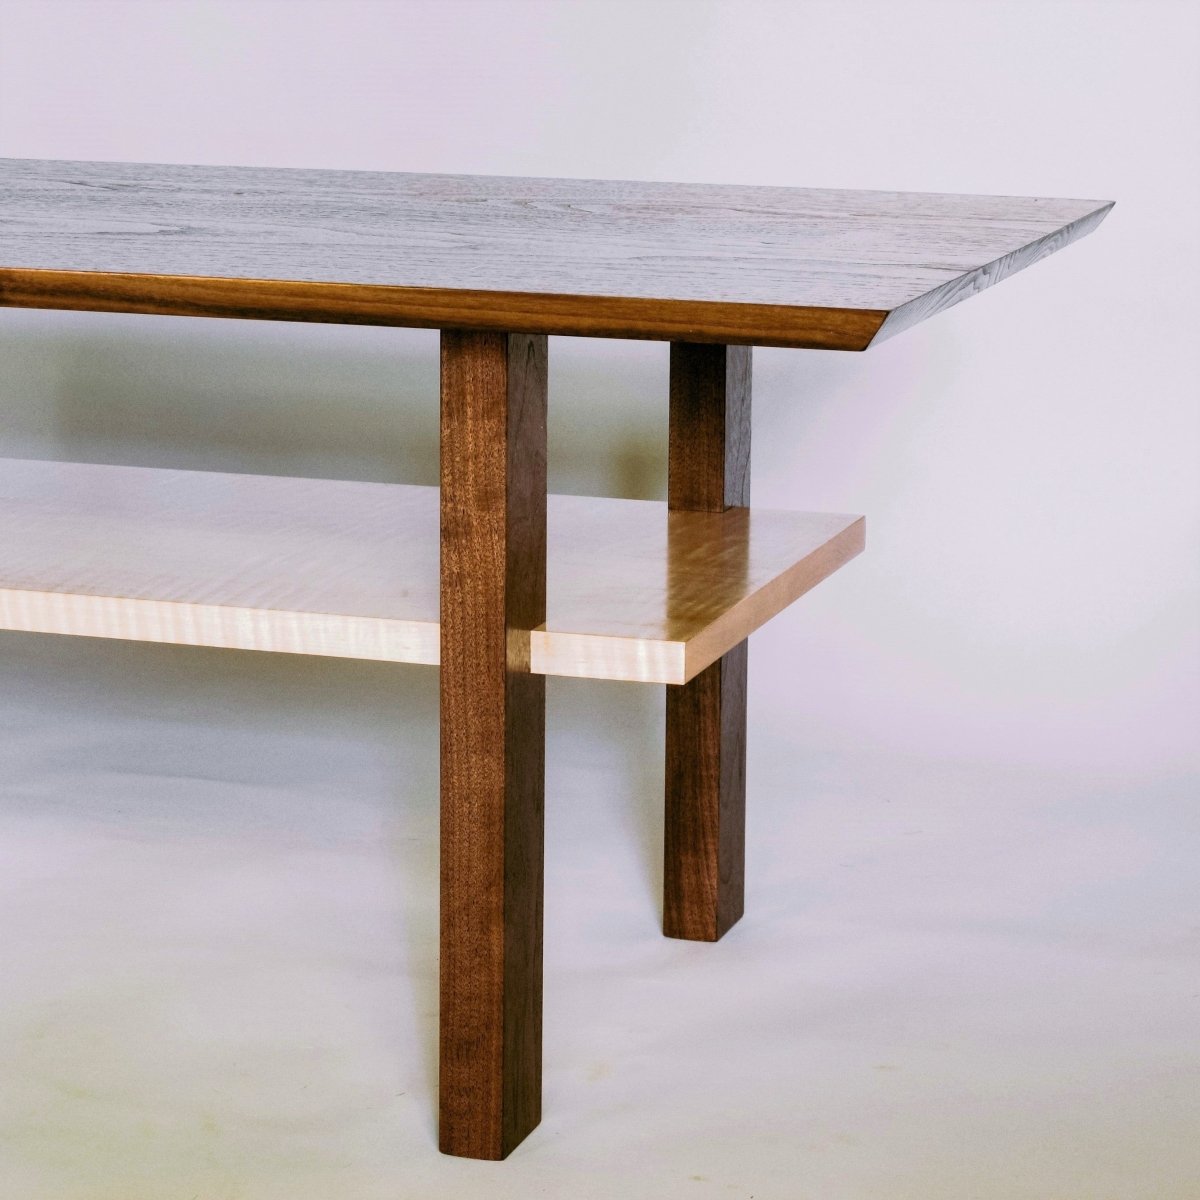 A minimalist wood coffee table design by Mokuzai Furniture - walnut and tiger maple coffee table with shelf